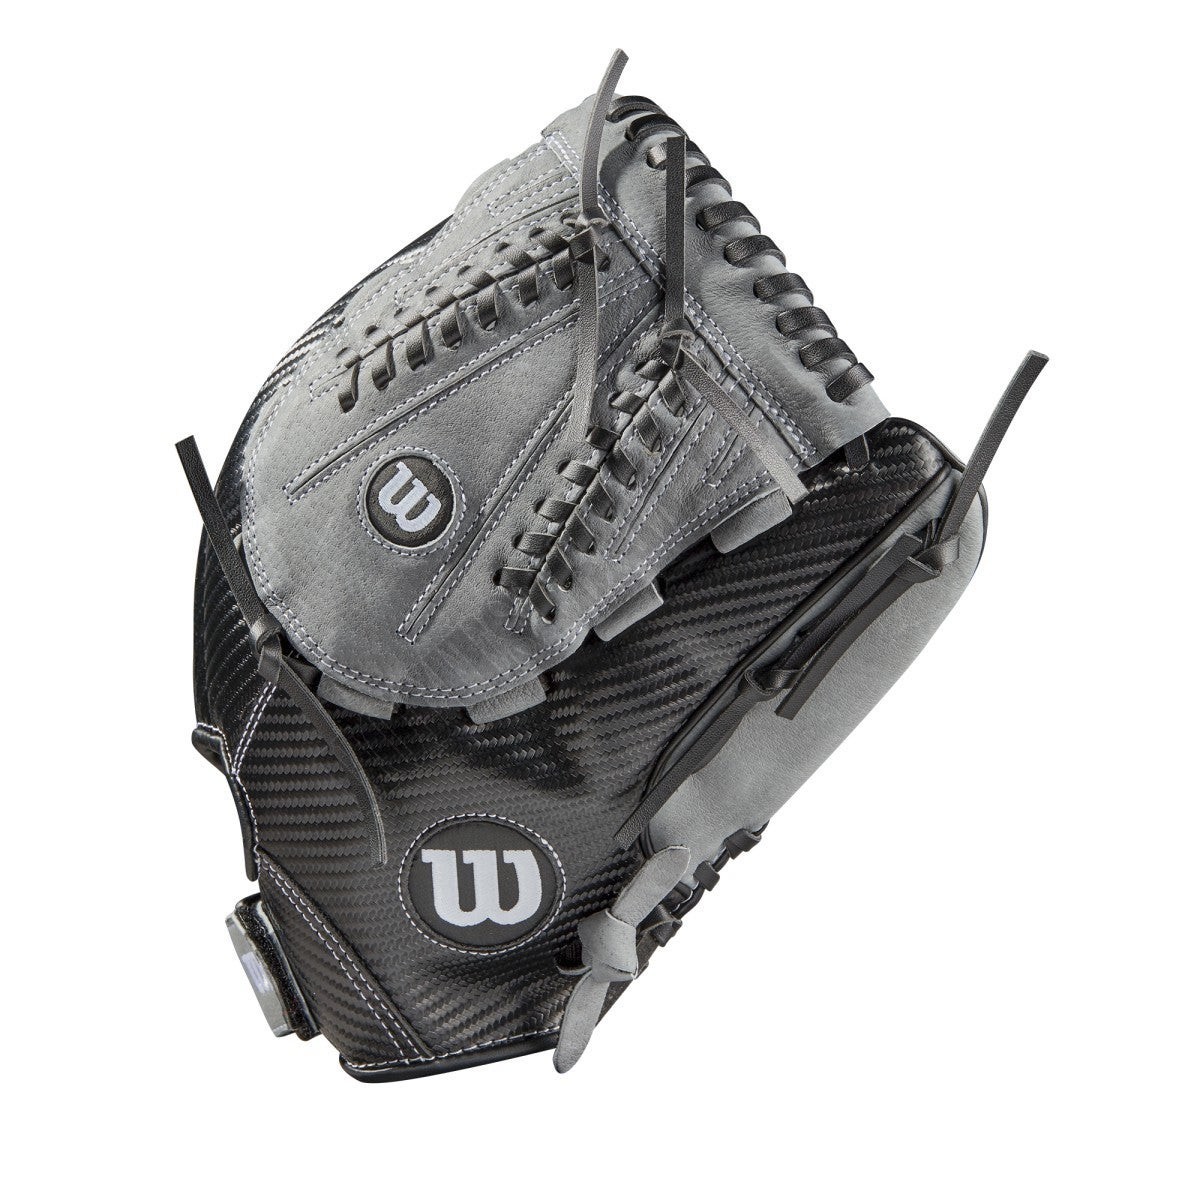 2021 A360 SP13 13" Slowpitch Softball Glove ● Wilson Promotions - -3